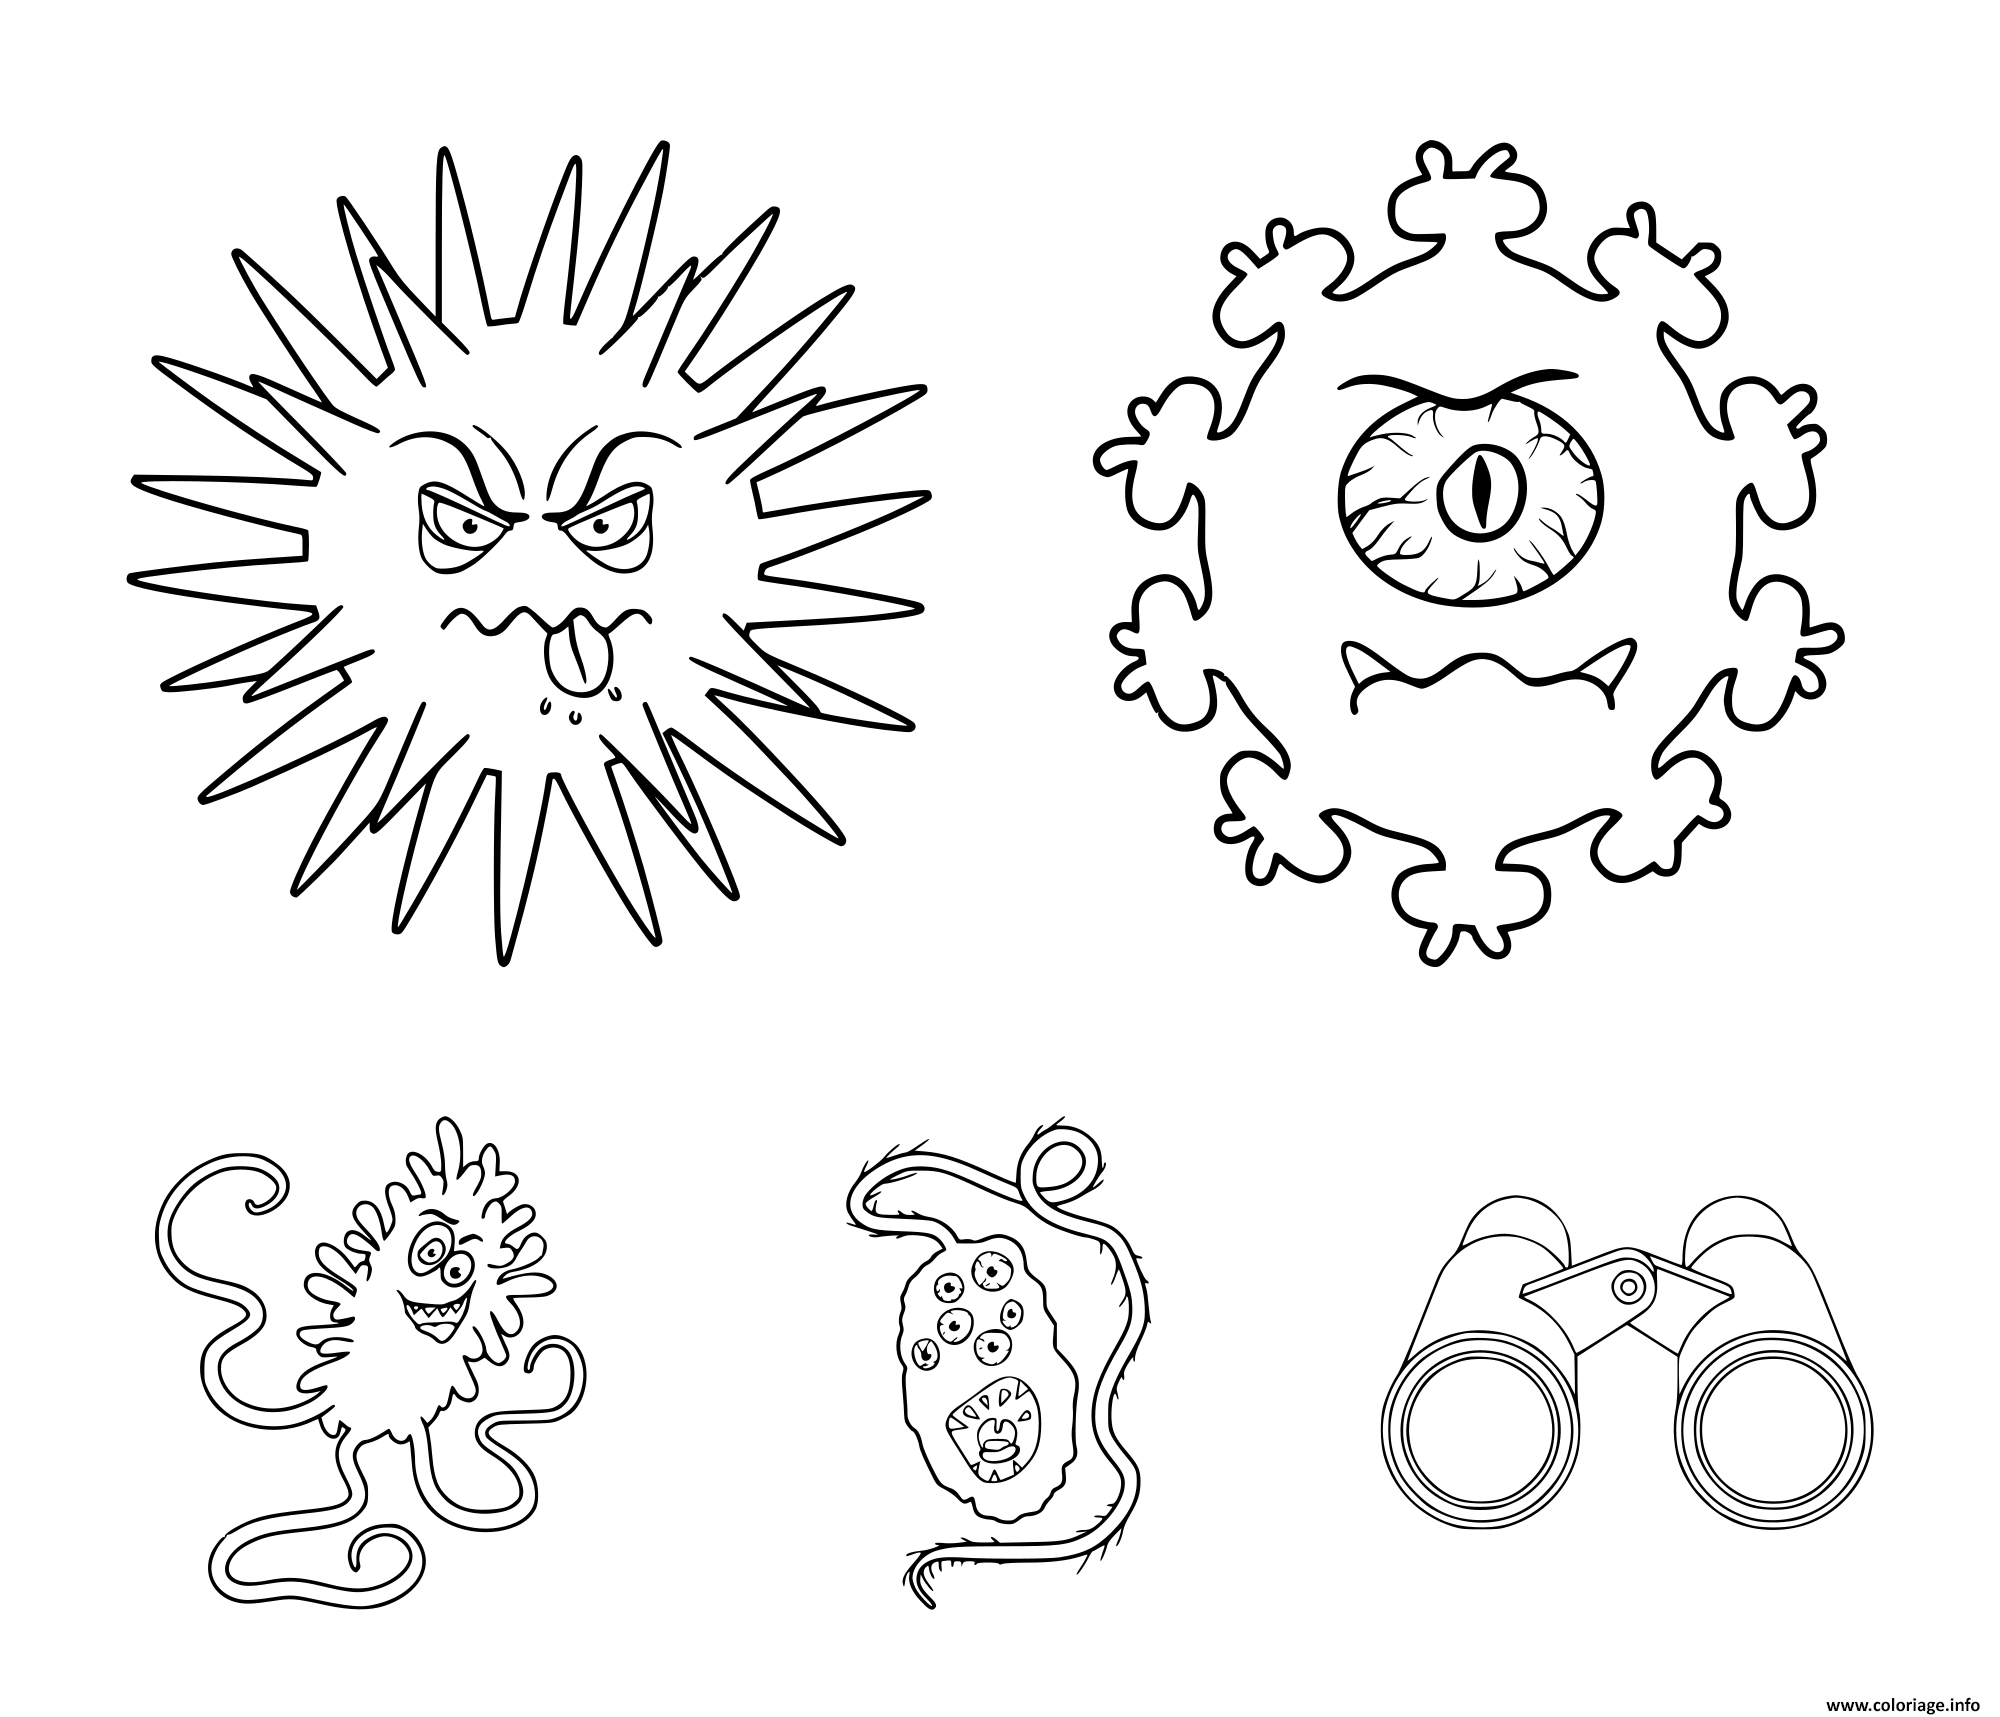 Dessin different types of microbes and virus Covid 19 Coloriage Gratuit à Imprimer